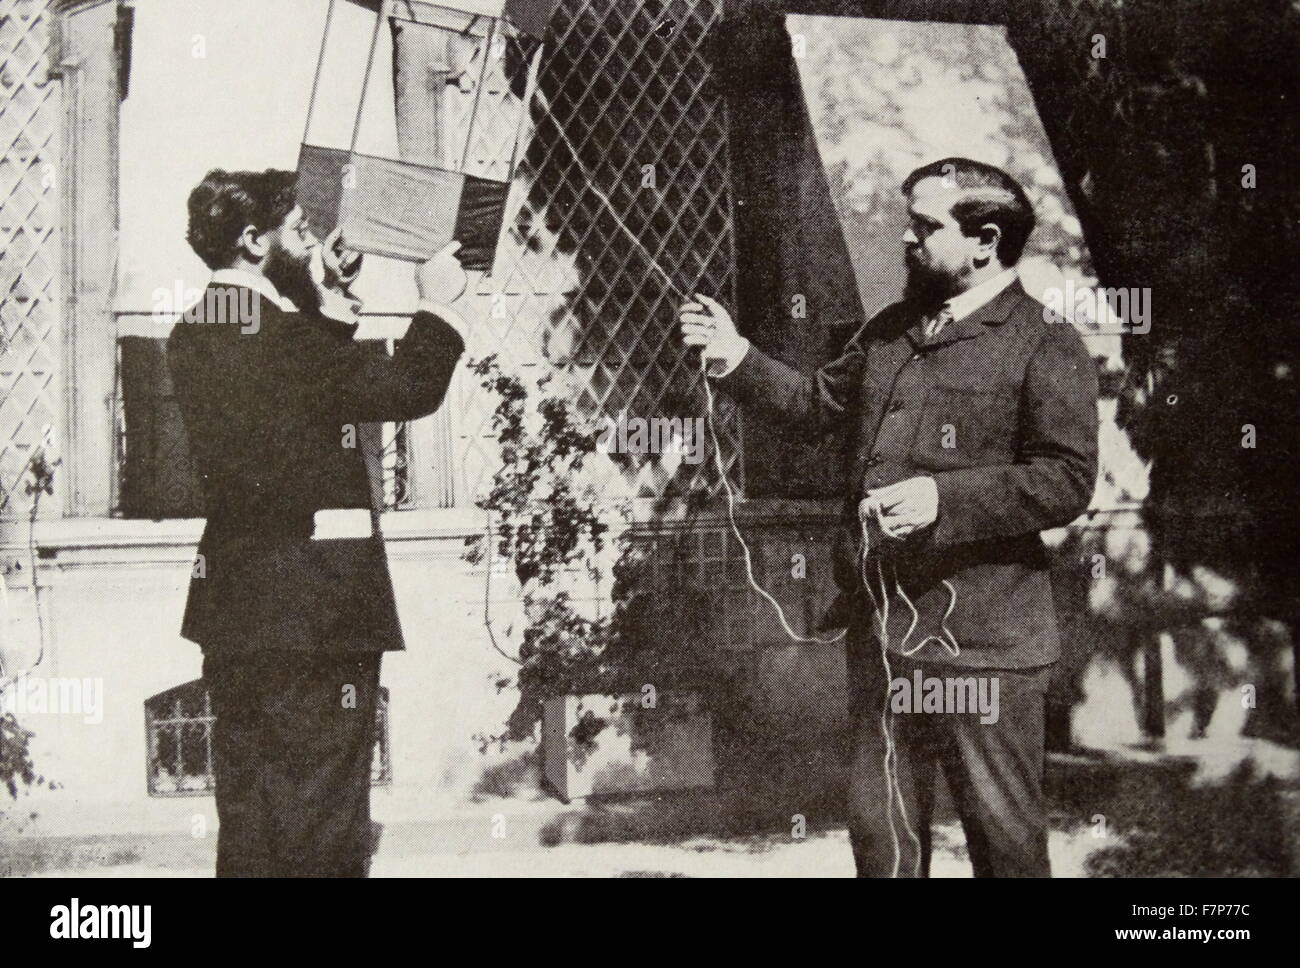 Claude Debussy 1862-1918 - French composer and louis laloy flying a kite. Stock Photo